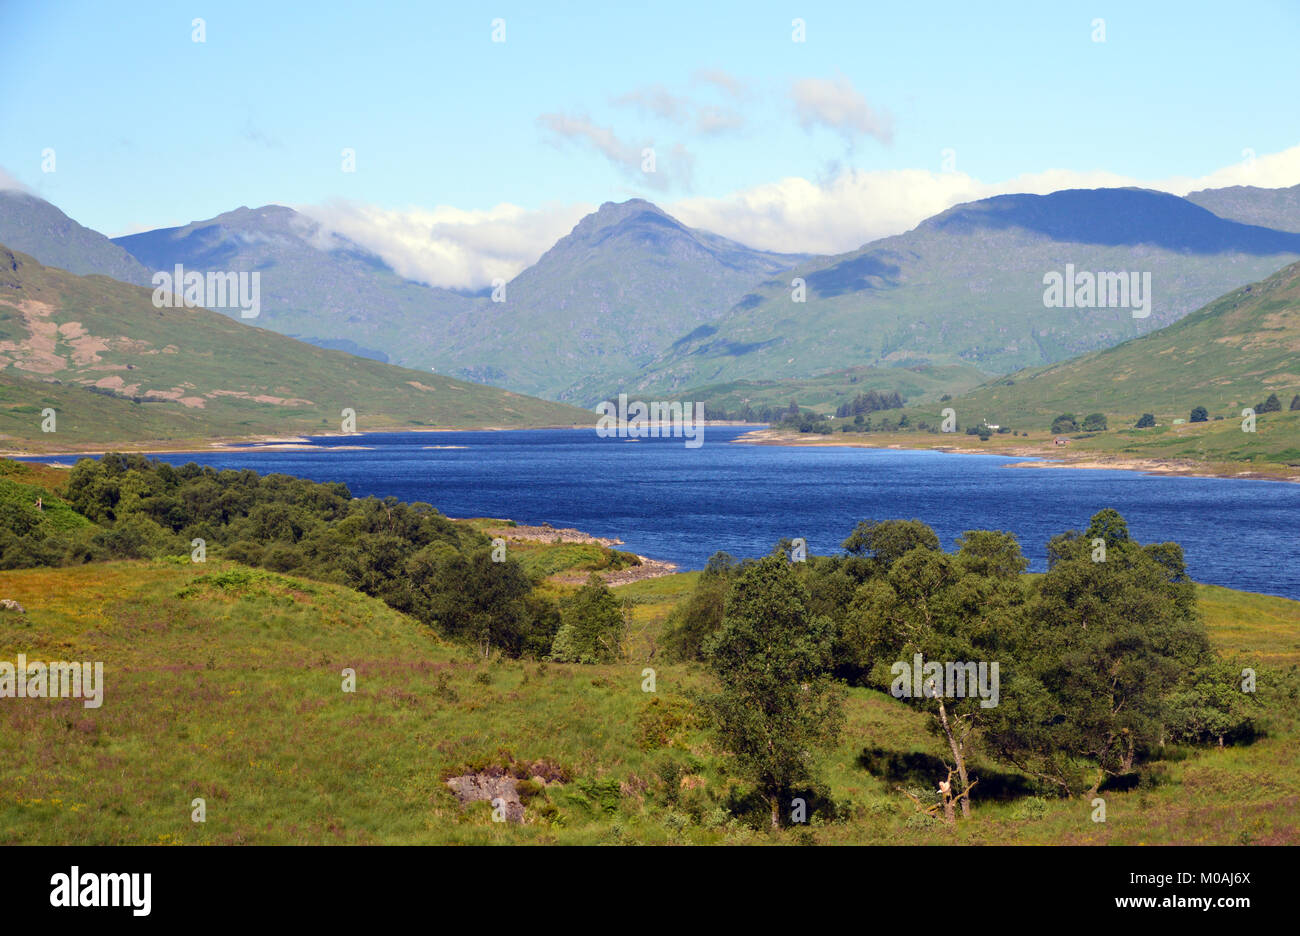 The Scottish Mountain Munros, Beinn Ime and Ben Vane from Loch Arklet in the Scottish Highlands, UK. Stock Photo